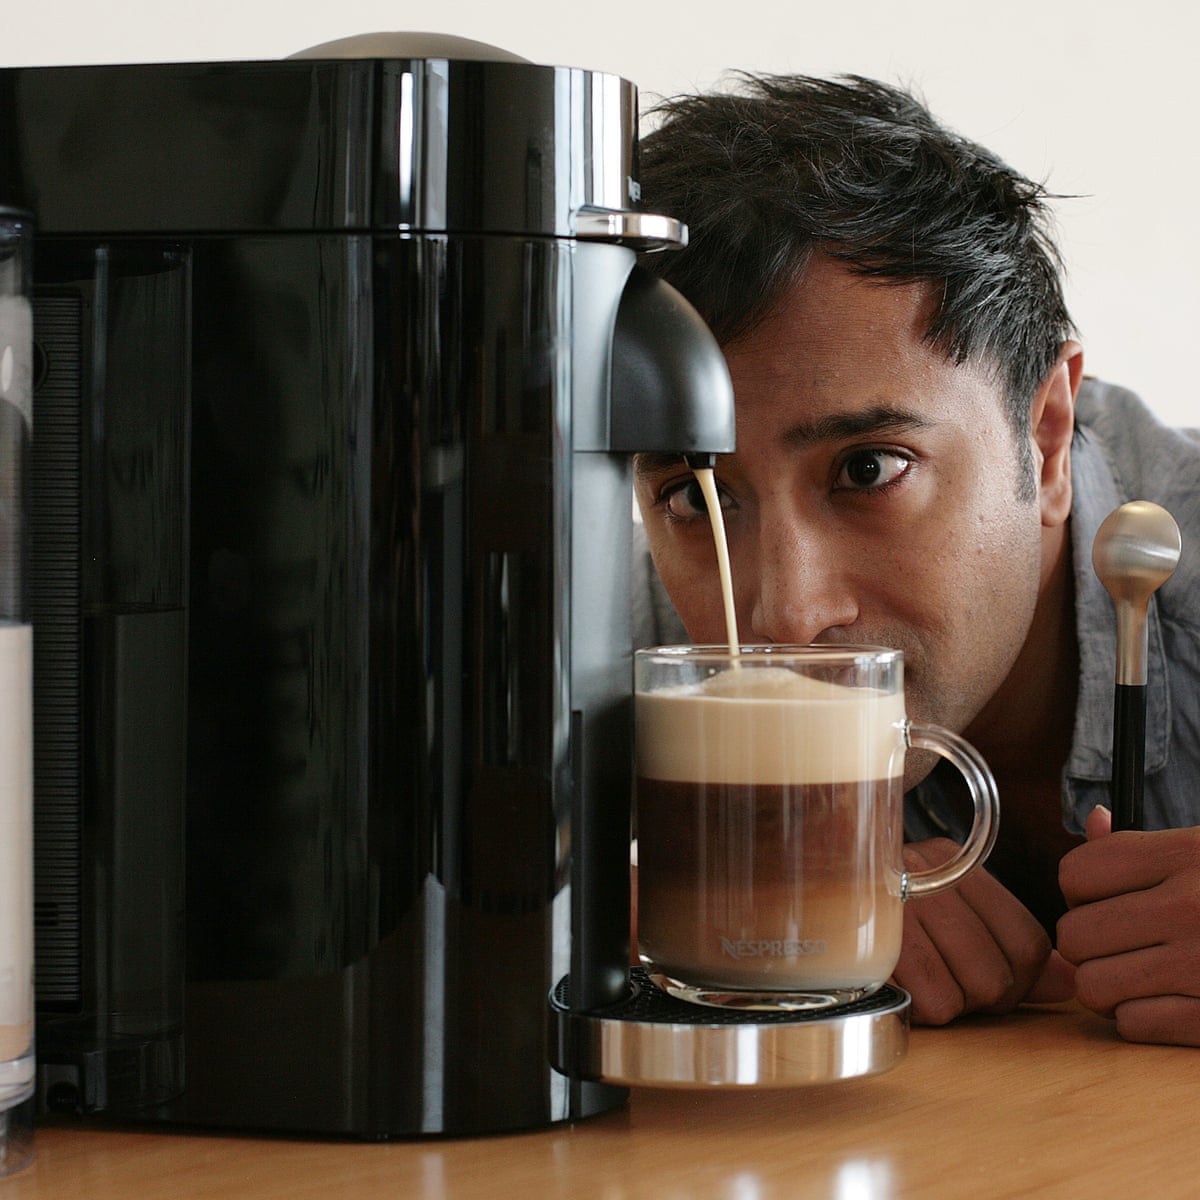 gadgets review: Vertuo machine – a haughty home barrista | Food | The Guardian